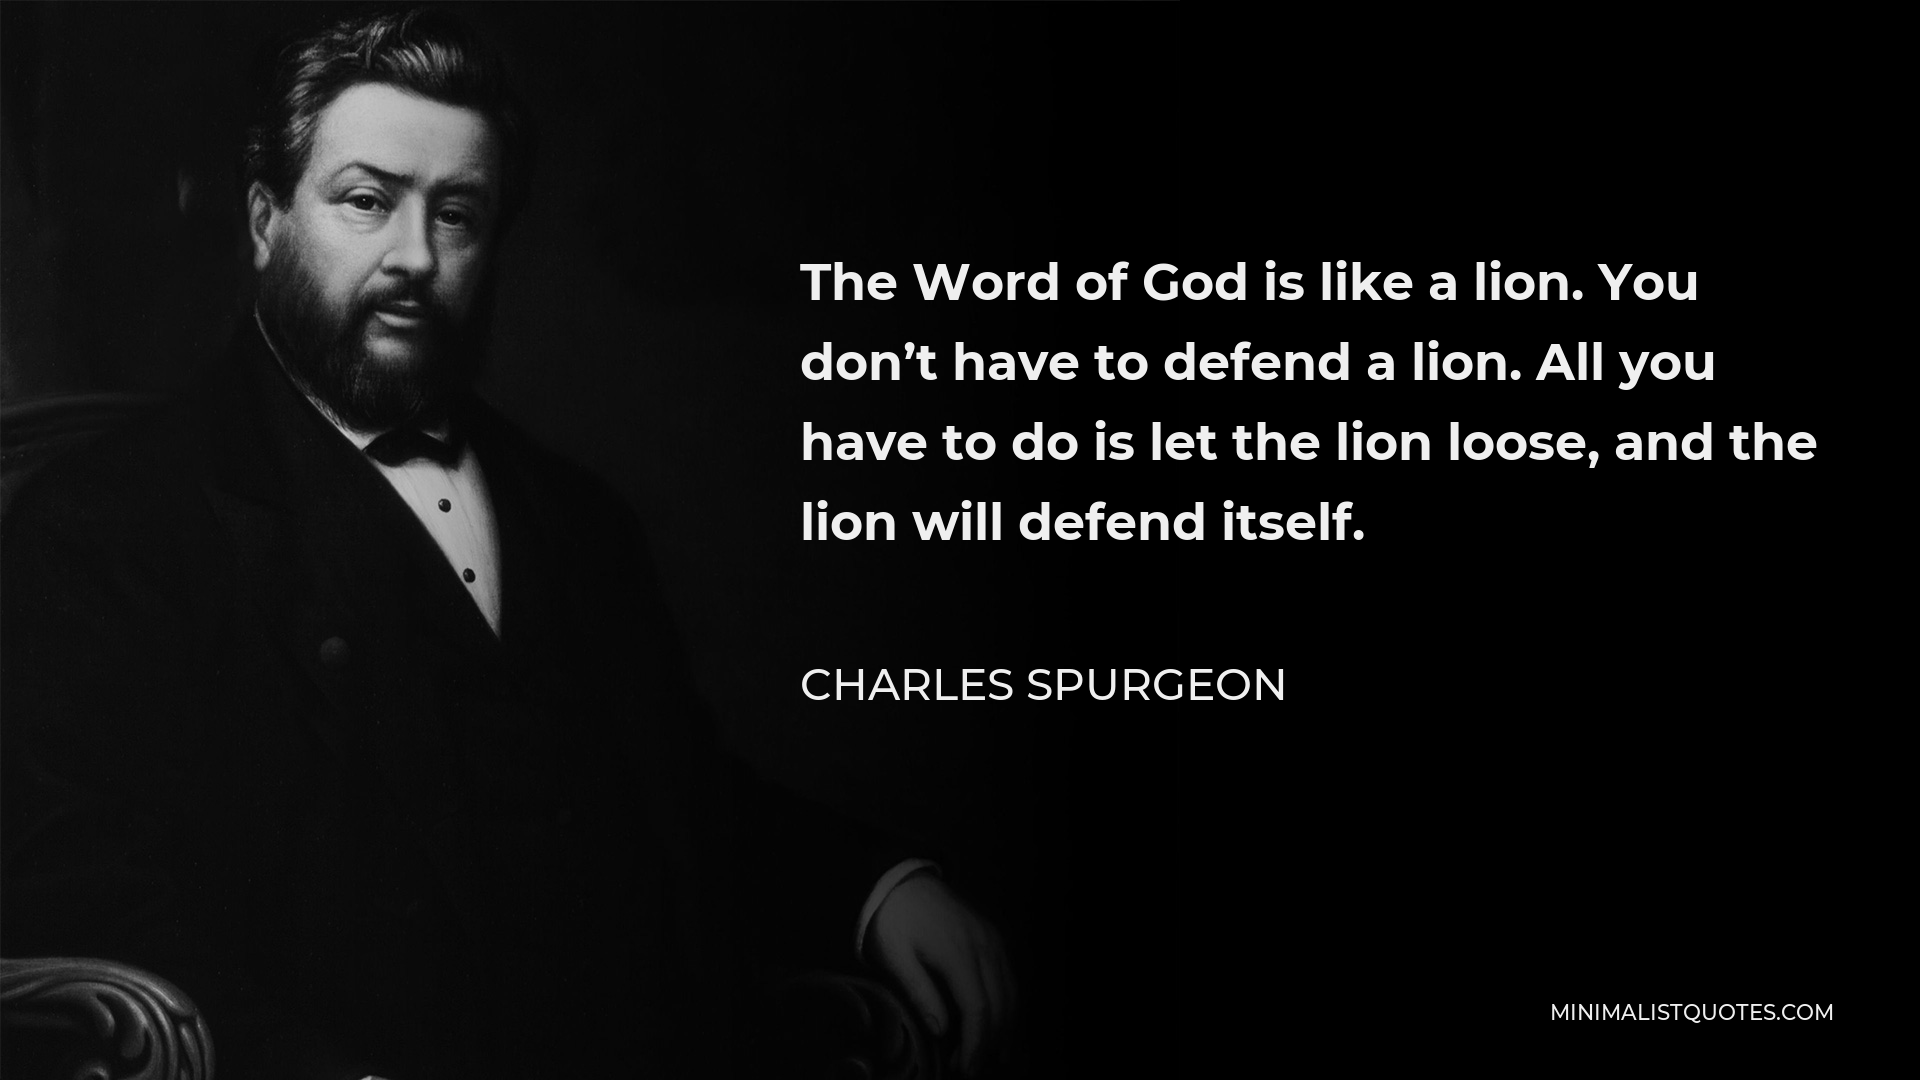 Charles Spurgeon Quote - The Word of God is like a lion. You don’t have to defend a lion. All you have to do is let the lion loose, and the lion will defend itself.